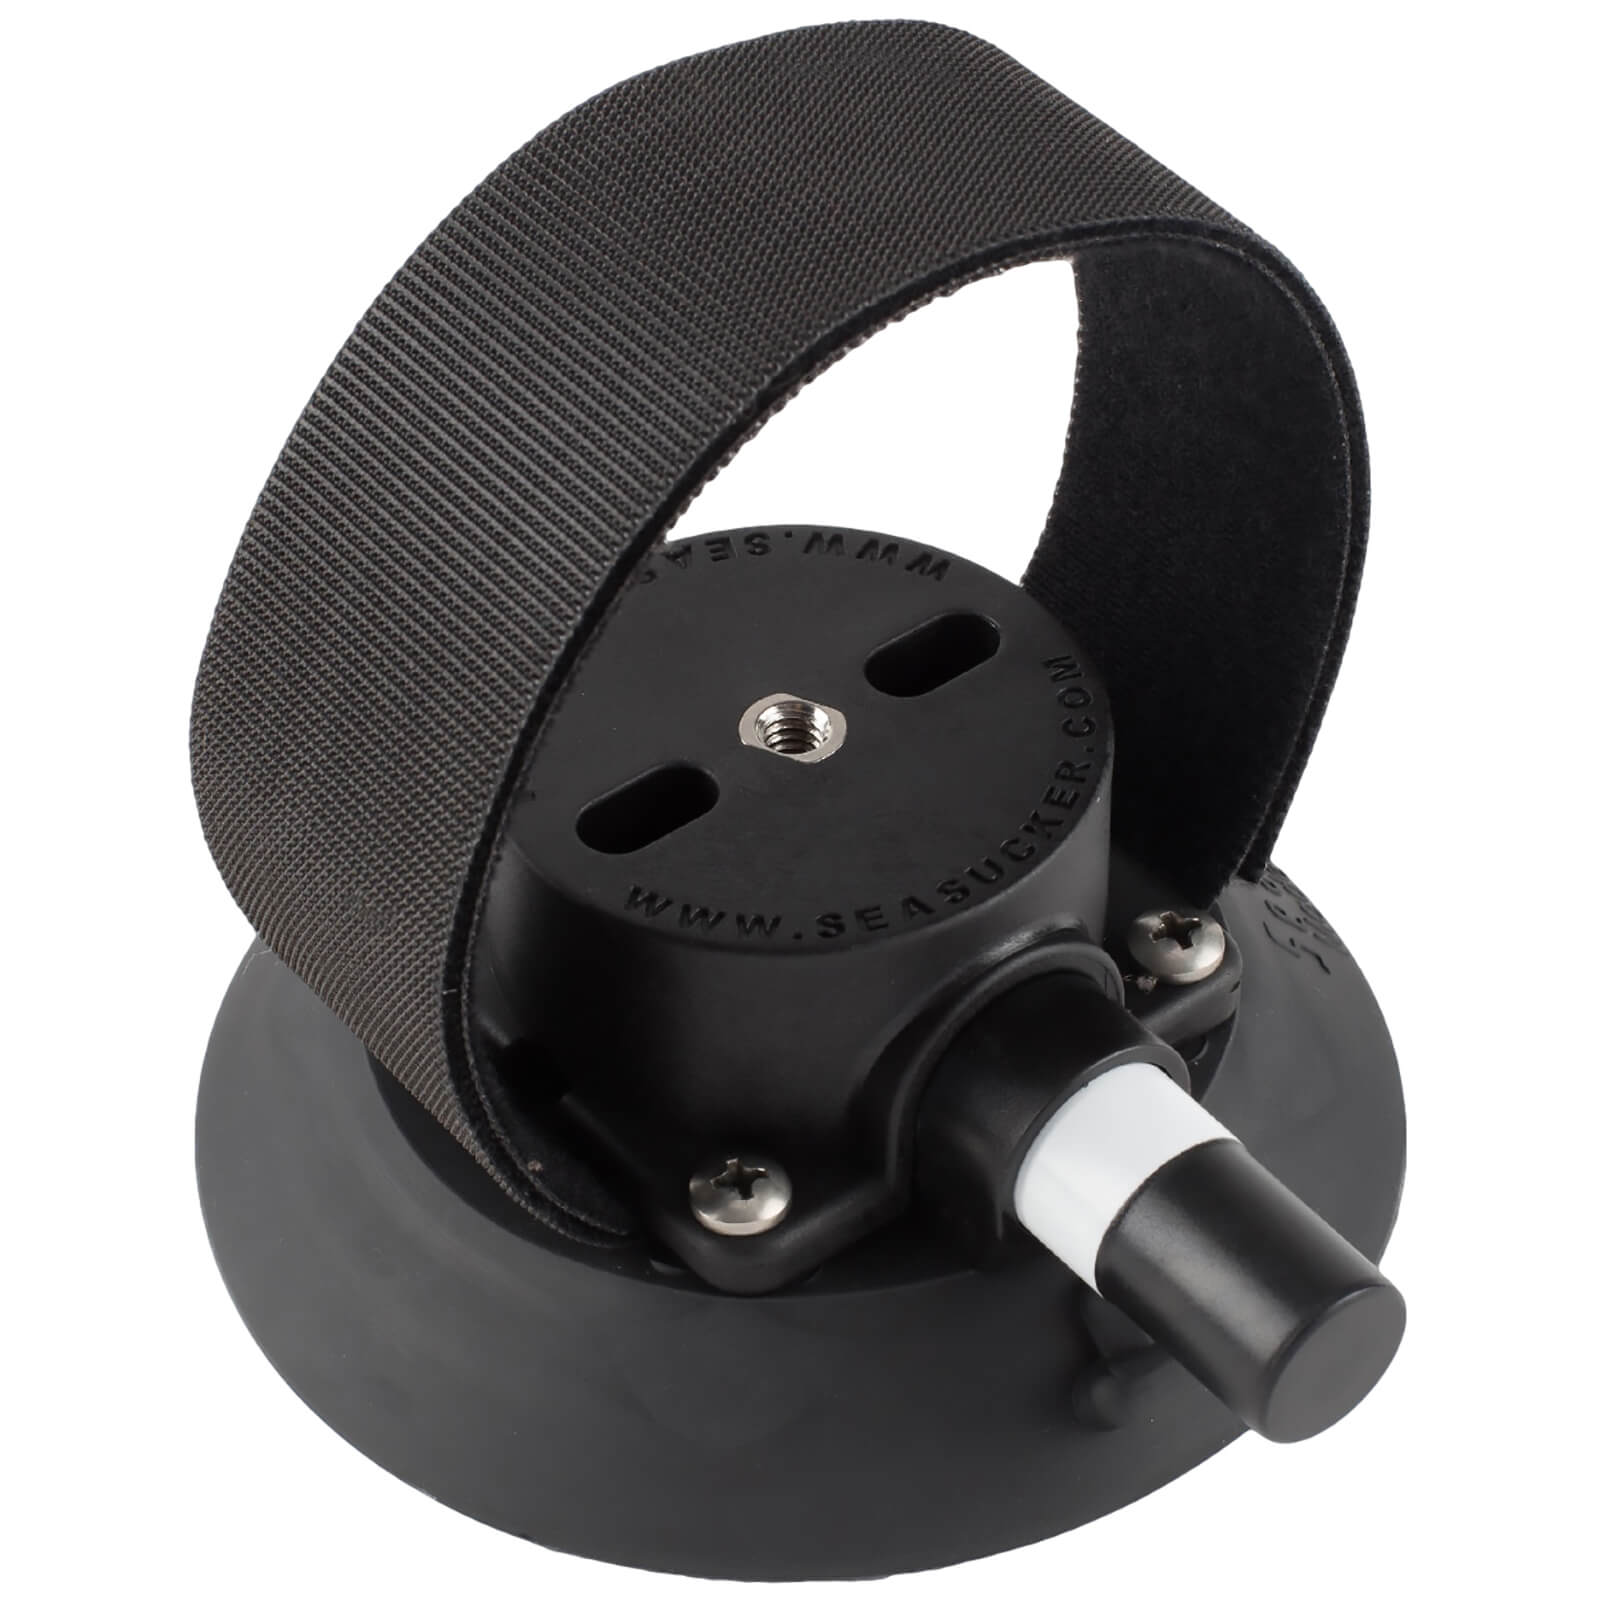 Image of SeaSucker Compact Rear Wheel Strap 4.5 Inch Vacuum Mount with Velcro Strap for Holding Rear Wheels